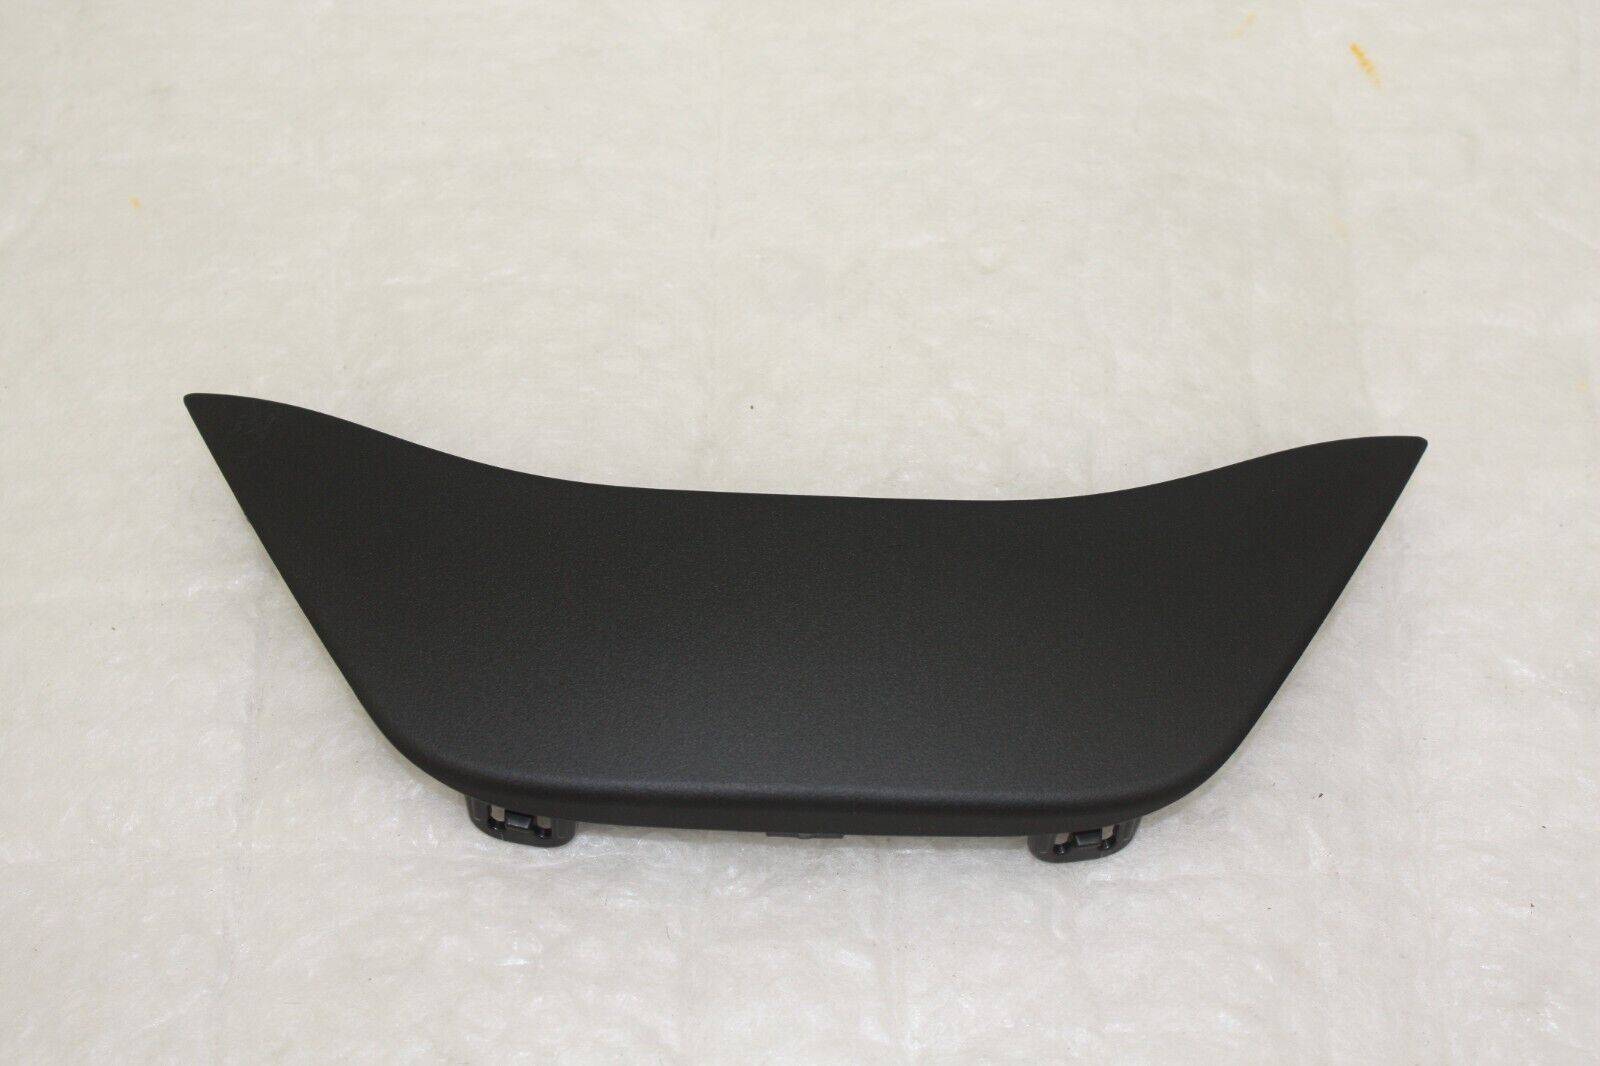 Toyota Yaris Front Bumper Grill Cover 2020 ON 53155 K0031 Genuine 176345660711